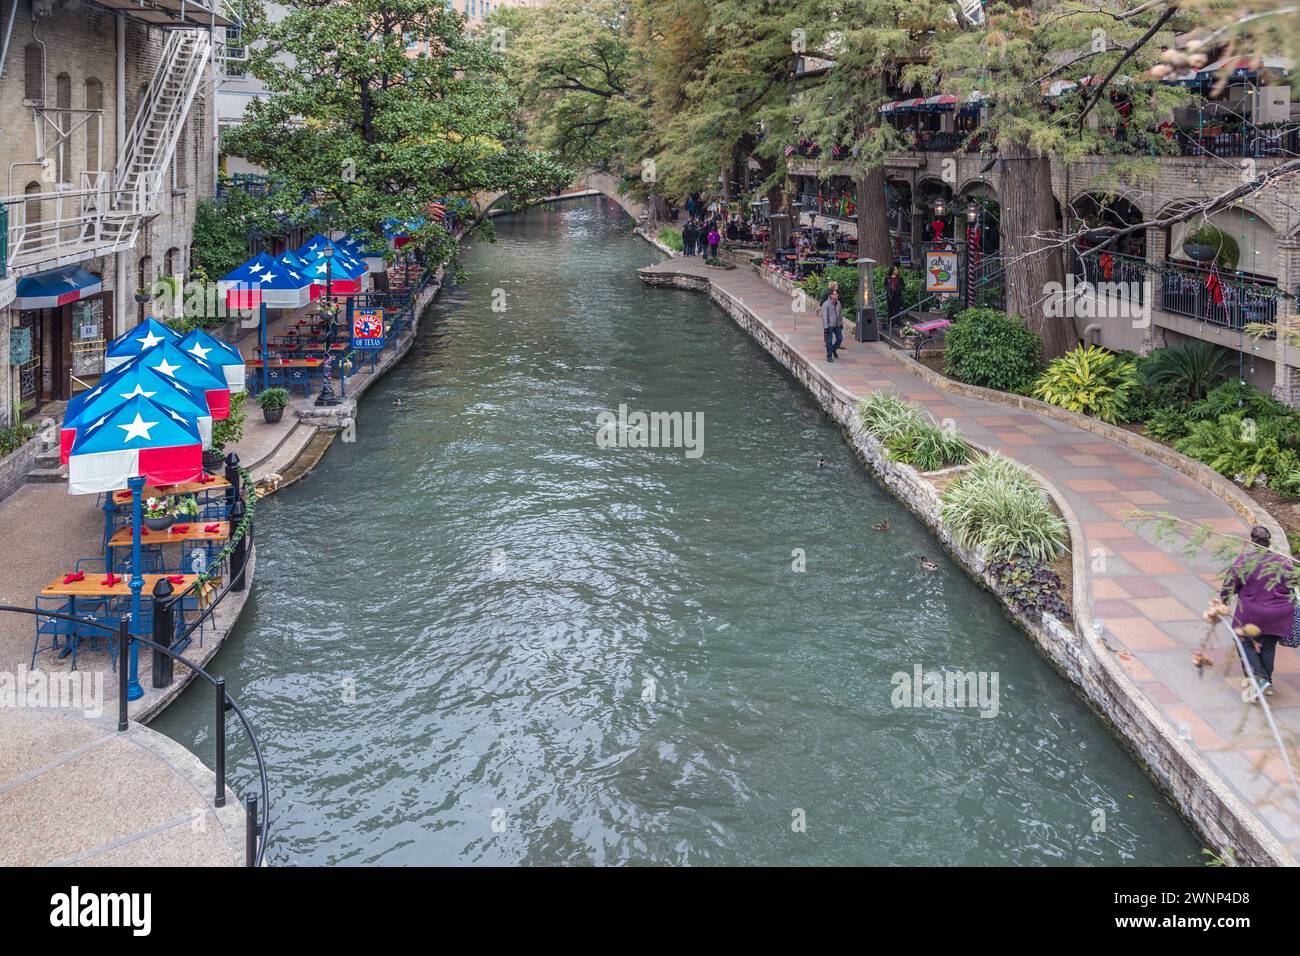 Cafe Ole and The Republic of Texas restaurants on the River Walk in downtown San Antonio, Texas Stock Photo